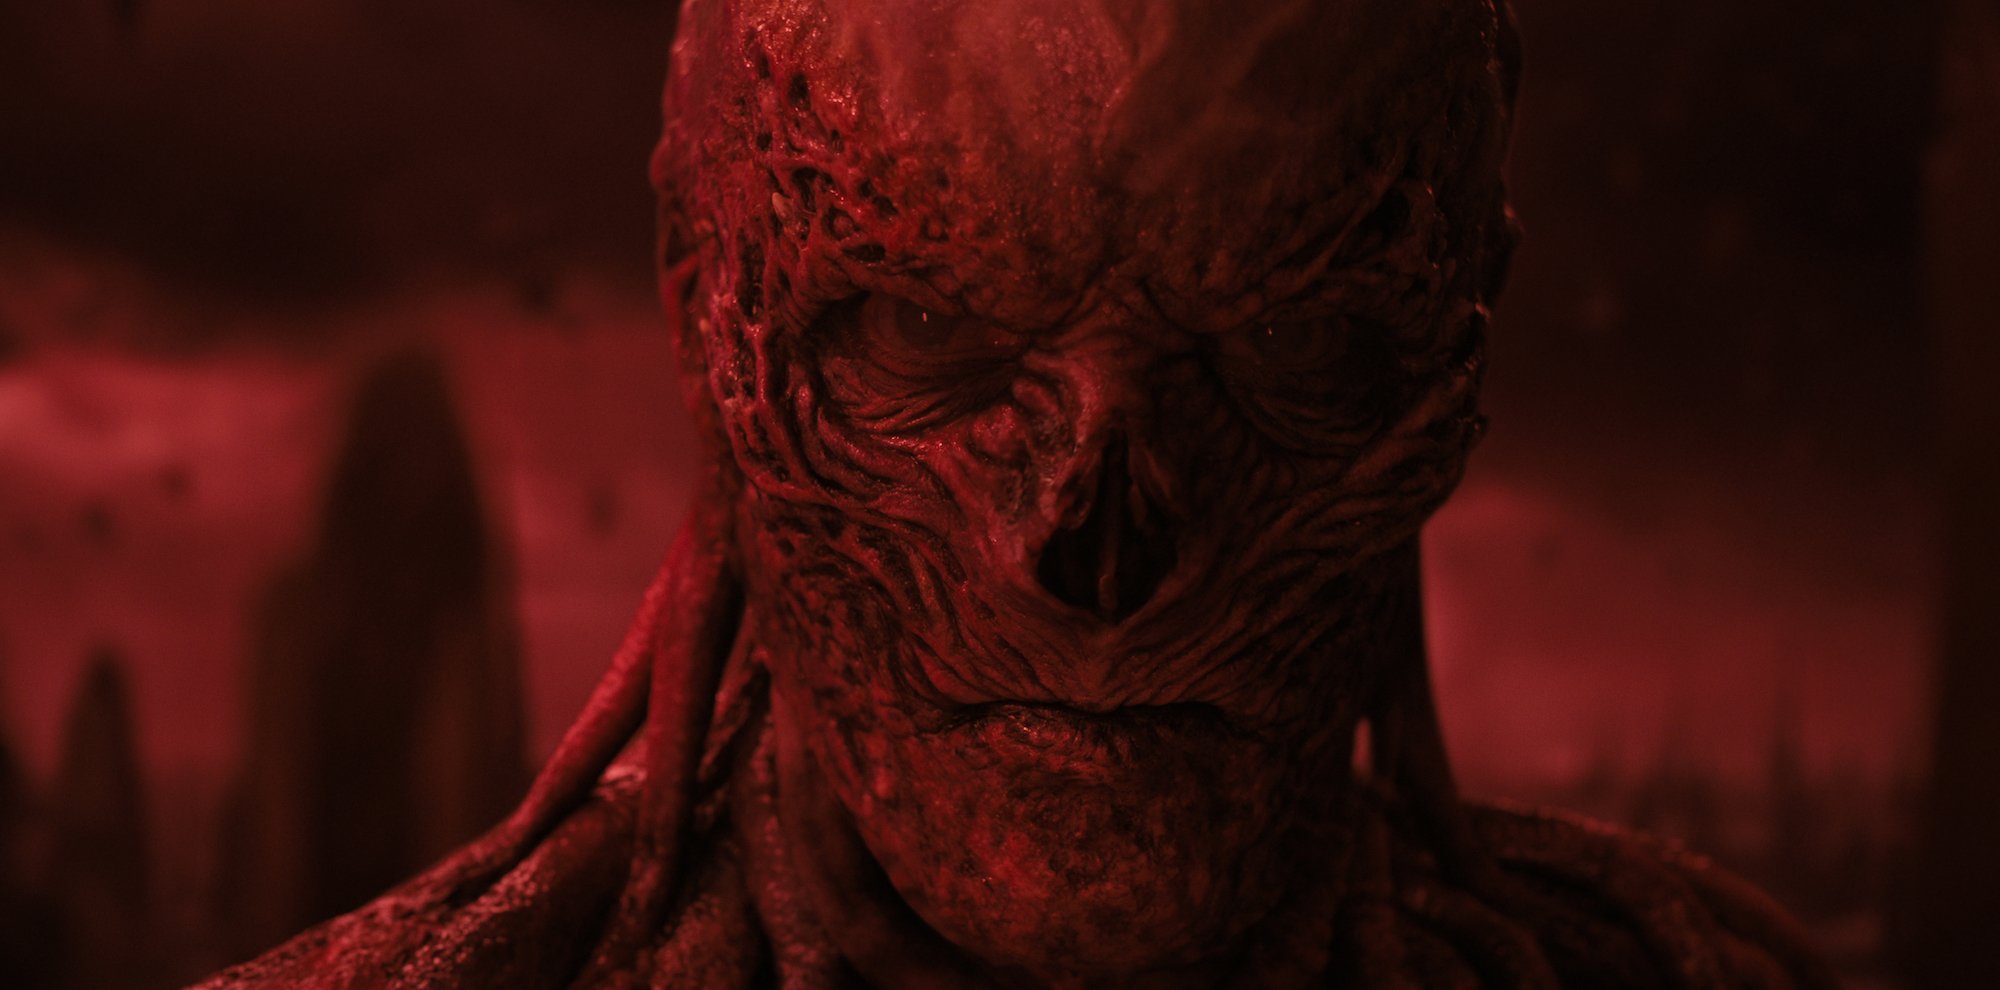 'Stranger Things 4' Vecna stares into the camera in production still from volume I.